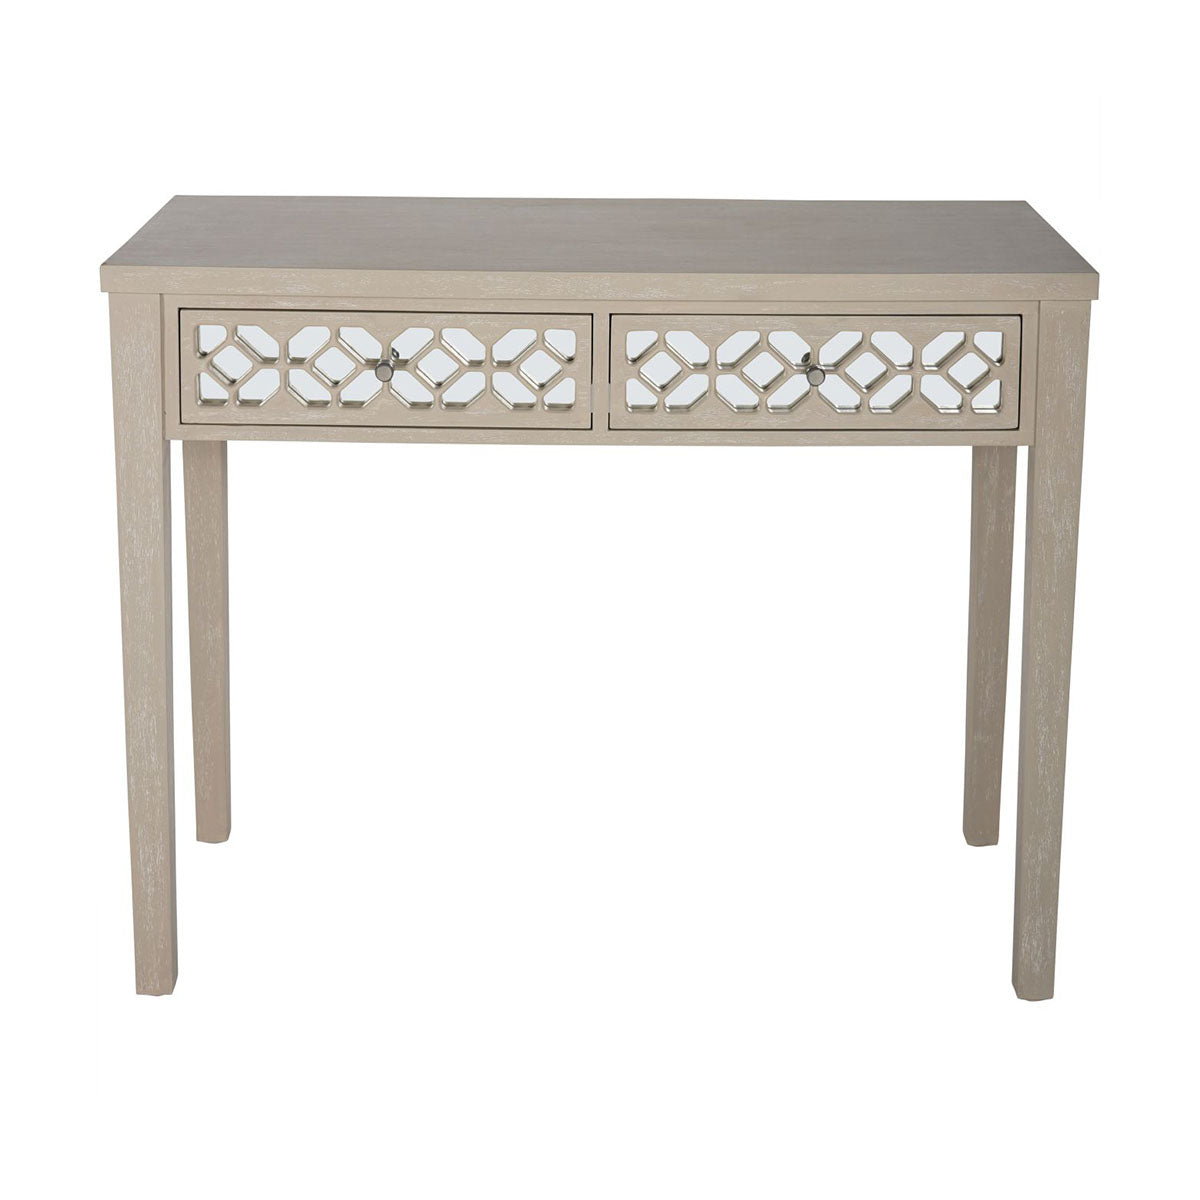 Campbell 2 Drawer Console Table 100cm